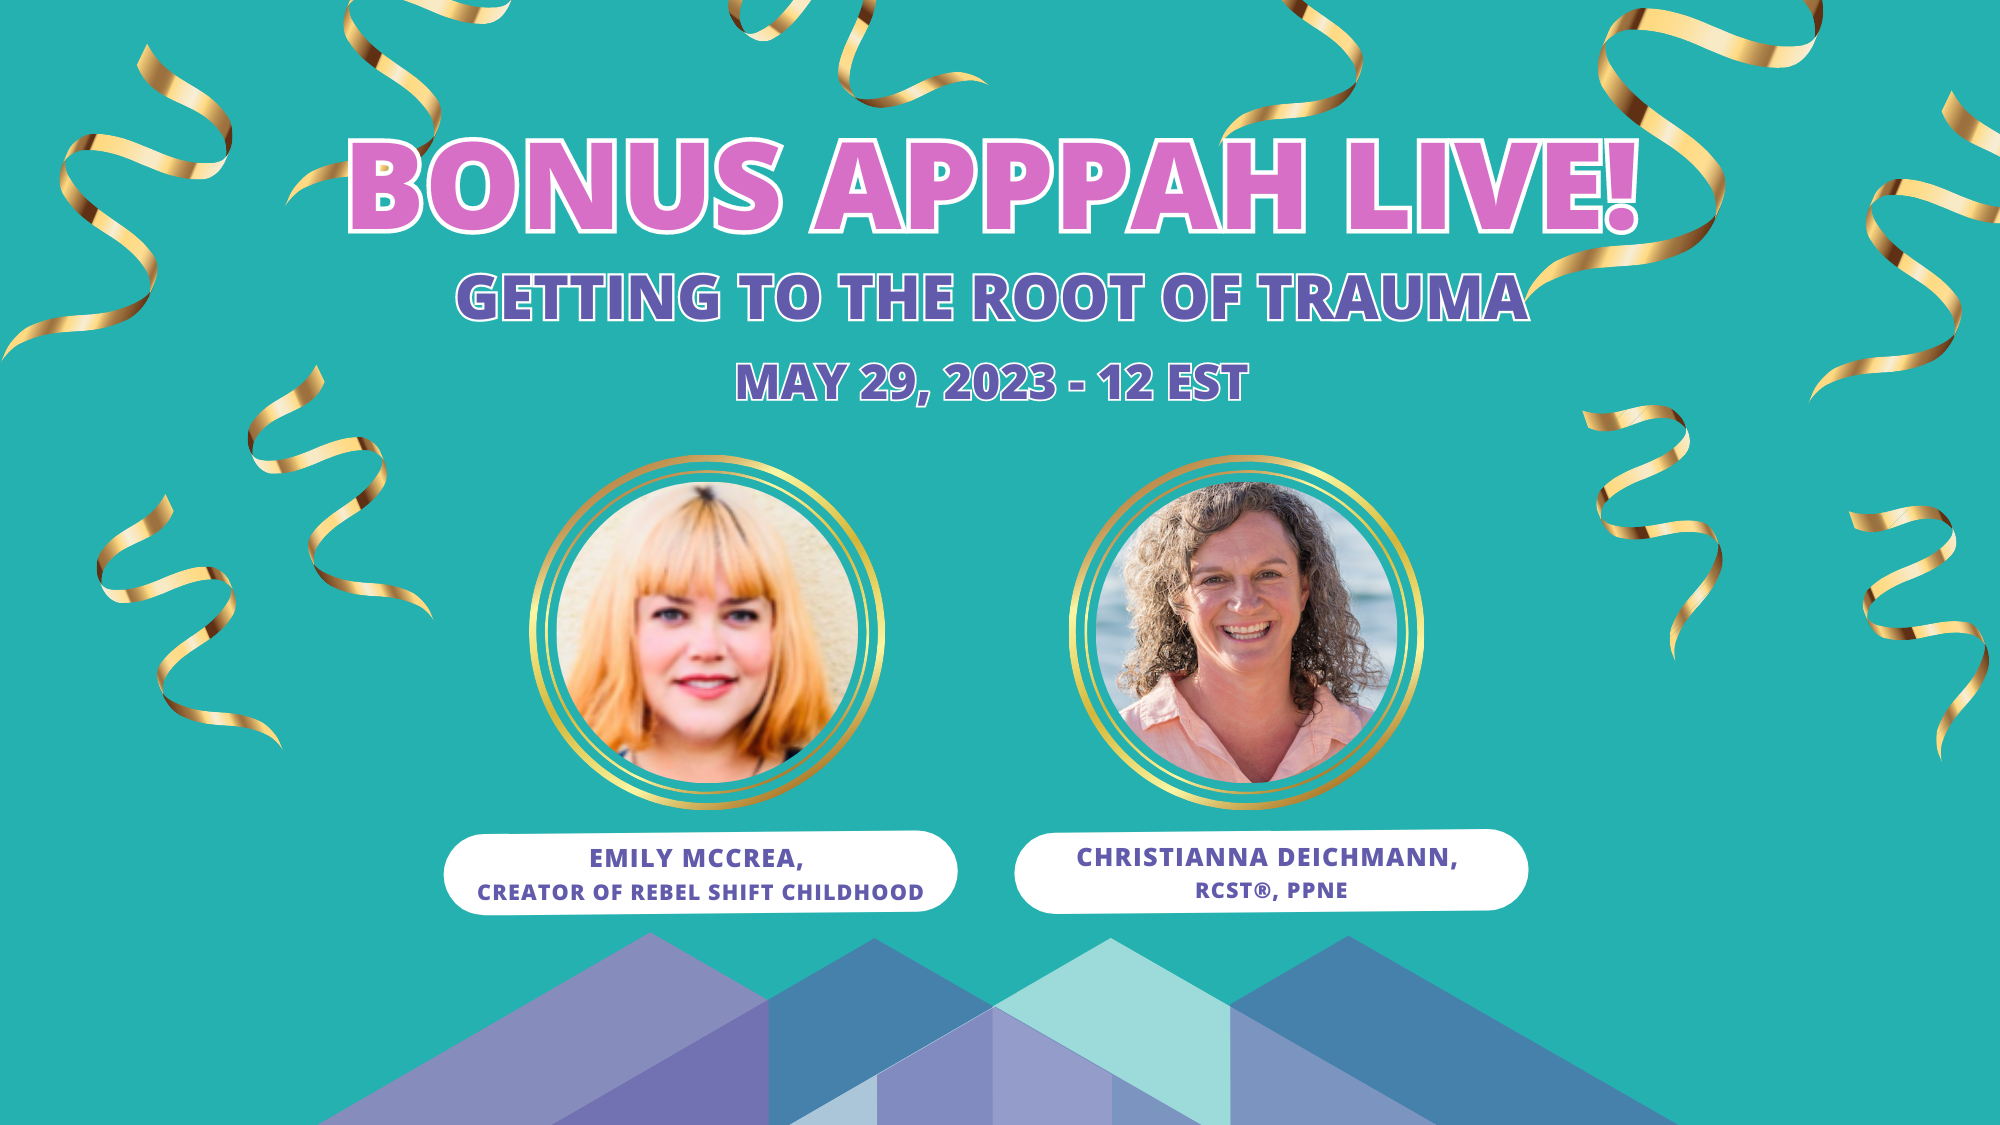 Bonus APPPAH Live: Getting to the Root of Trauma with Christianna Deichmann, RCST®, PPNE and Emily McCrea Creator of Rebel Shift Childhood